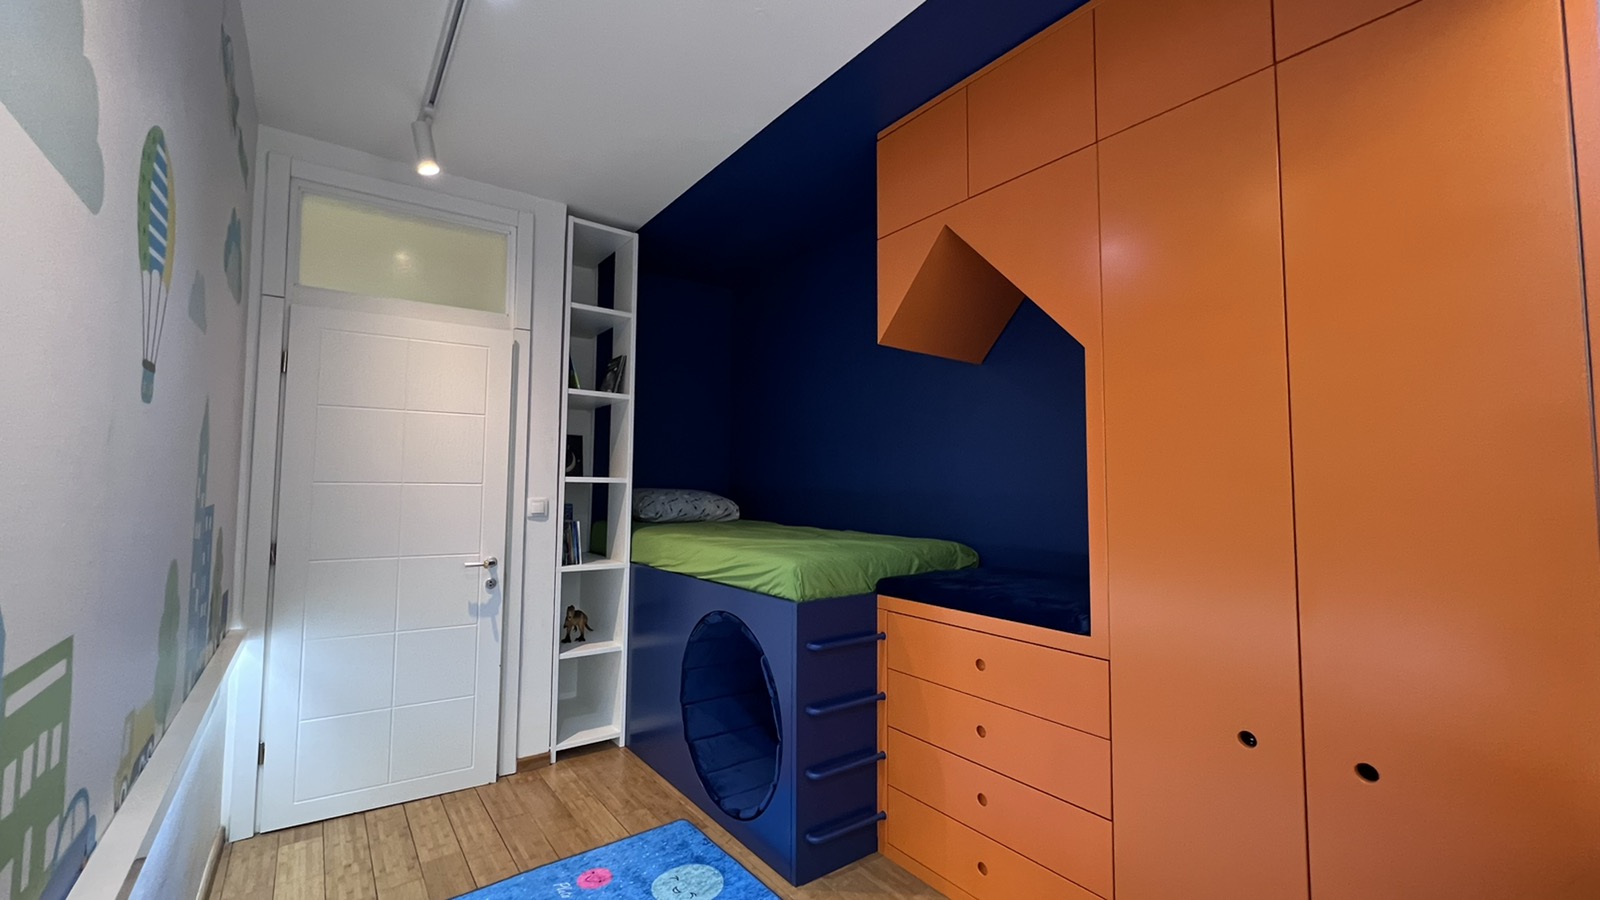 Kids room furniture made from colored mdf